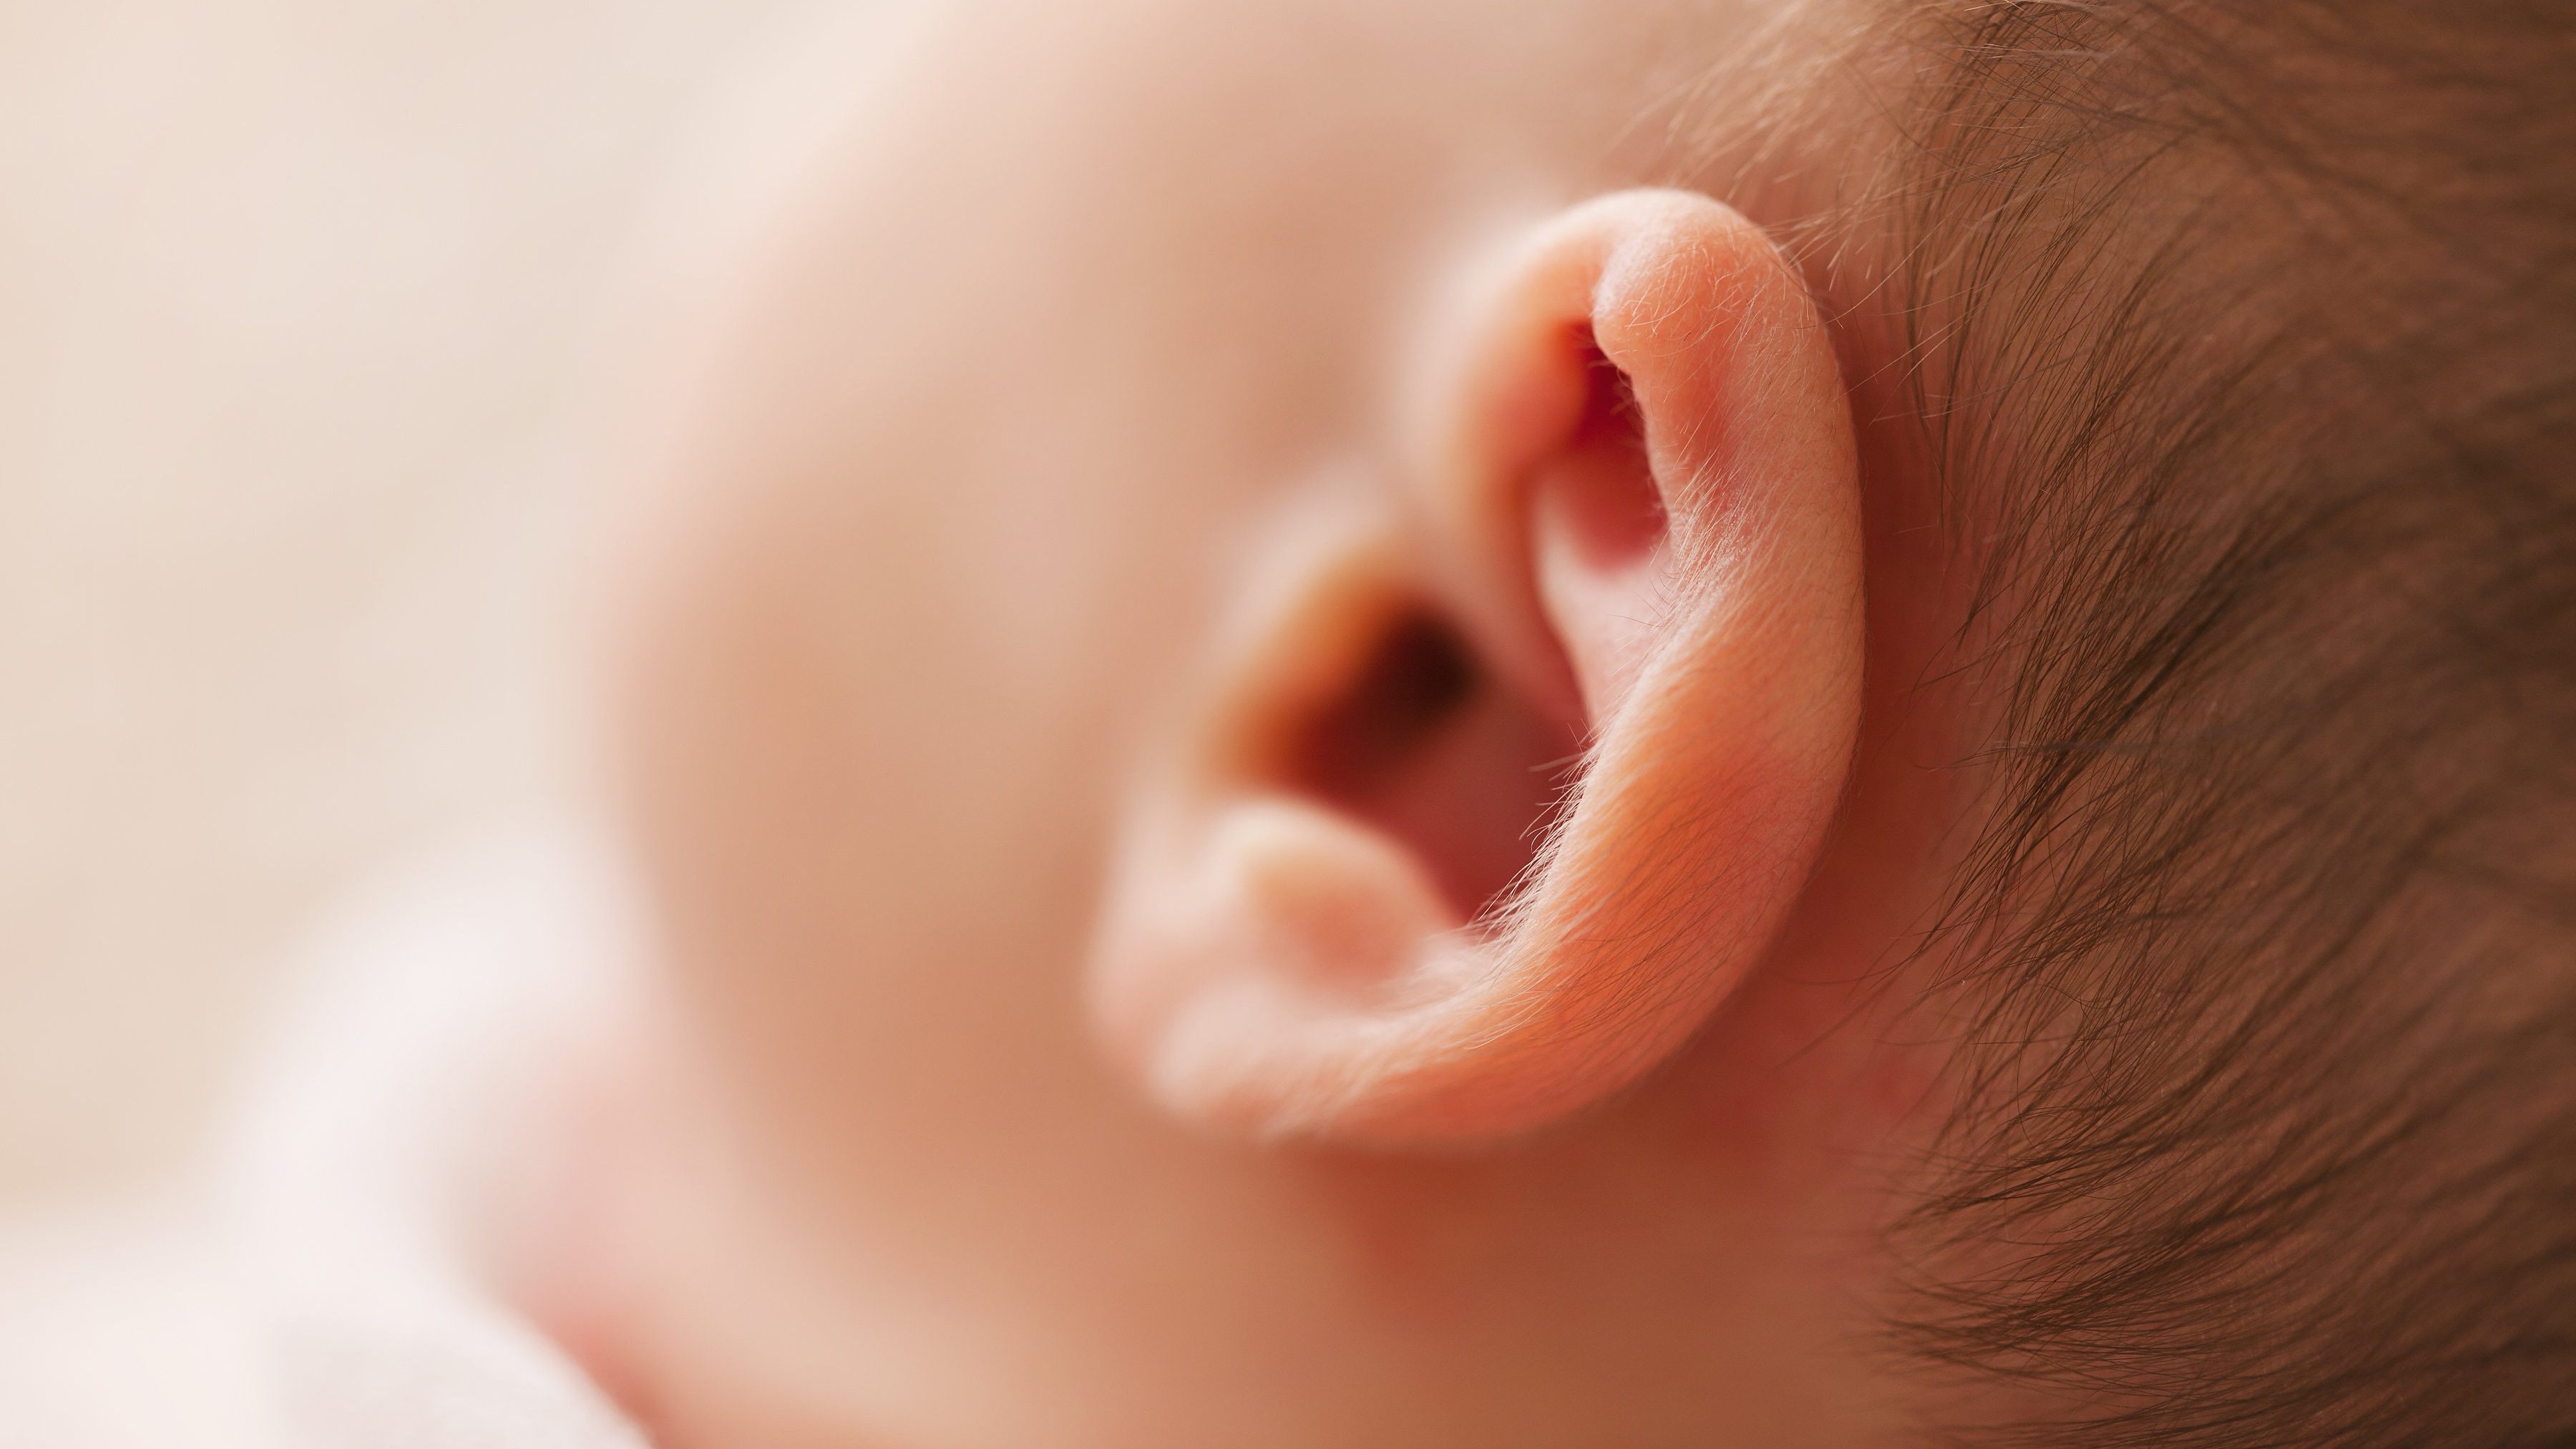 Stock image from Pexels of a baby's ear.